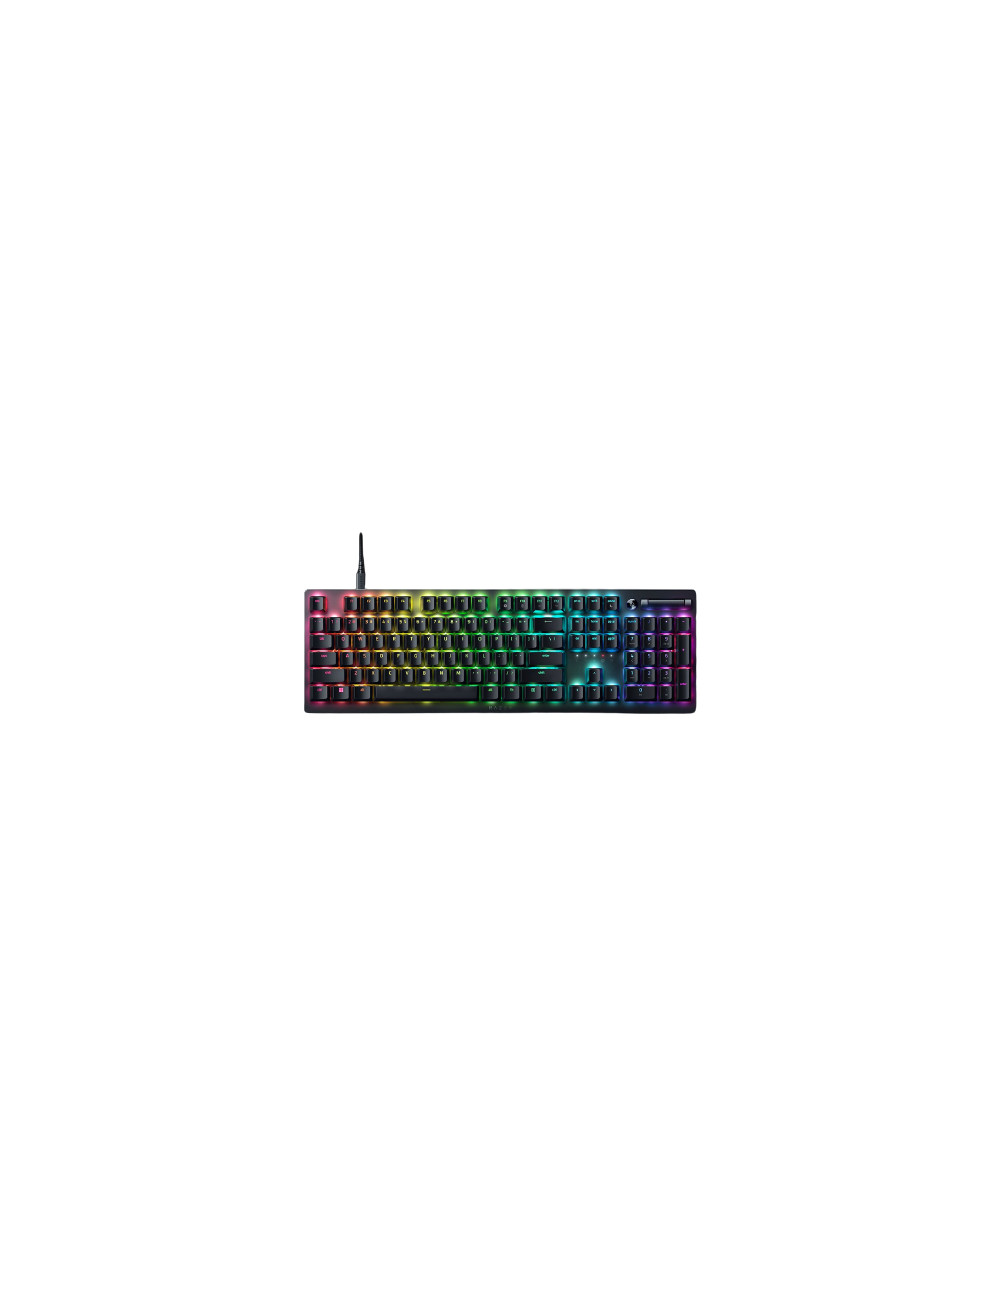 Razer Deathstalker V2 Gaming keyboard Multi-functional media button and media roller Fully programmable keys with on-the-fly mac